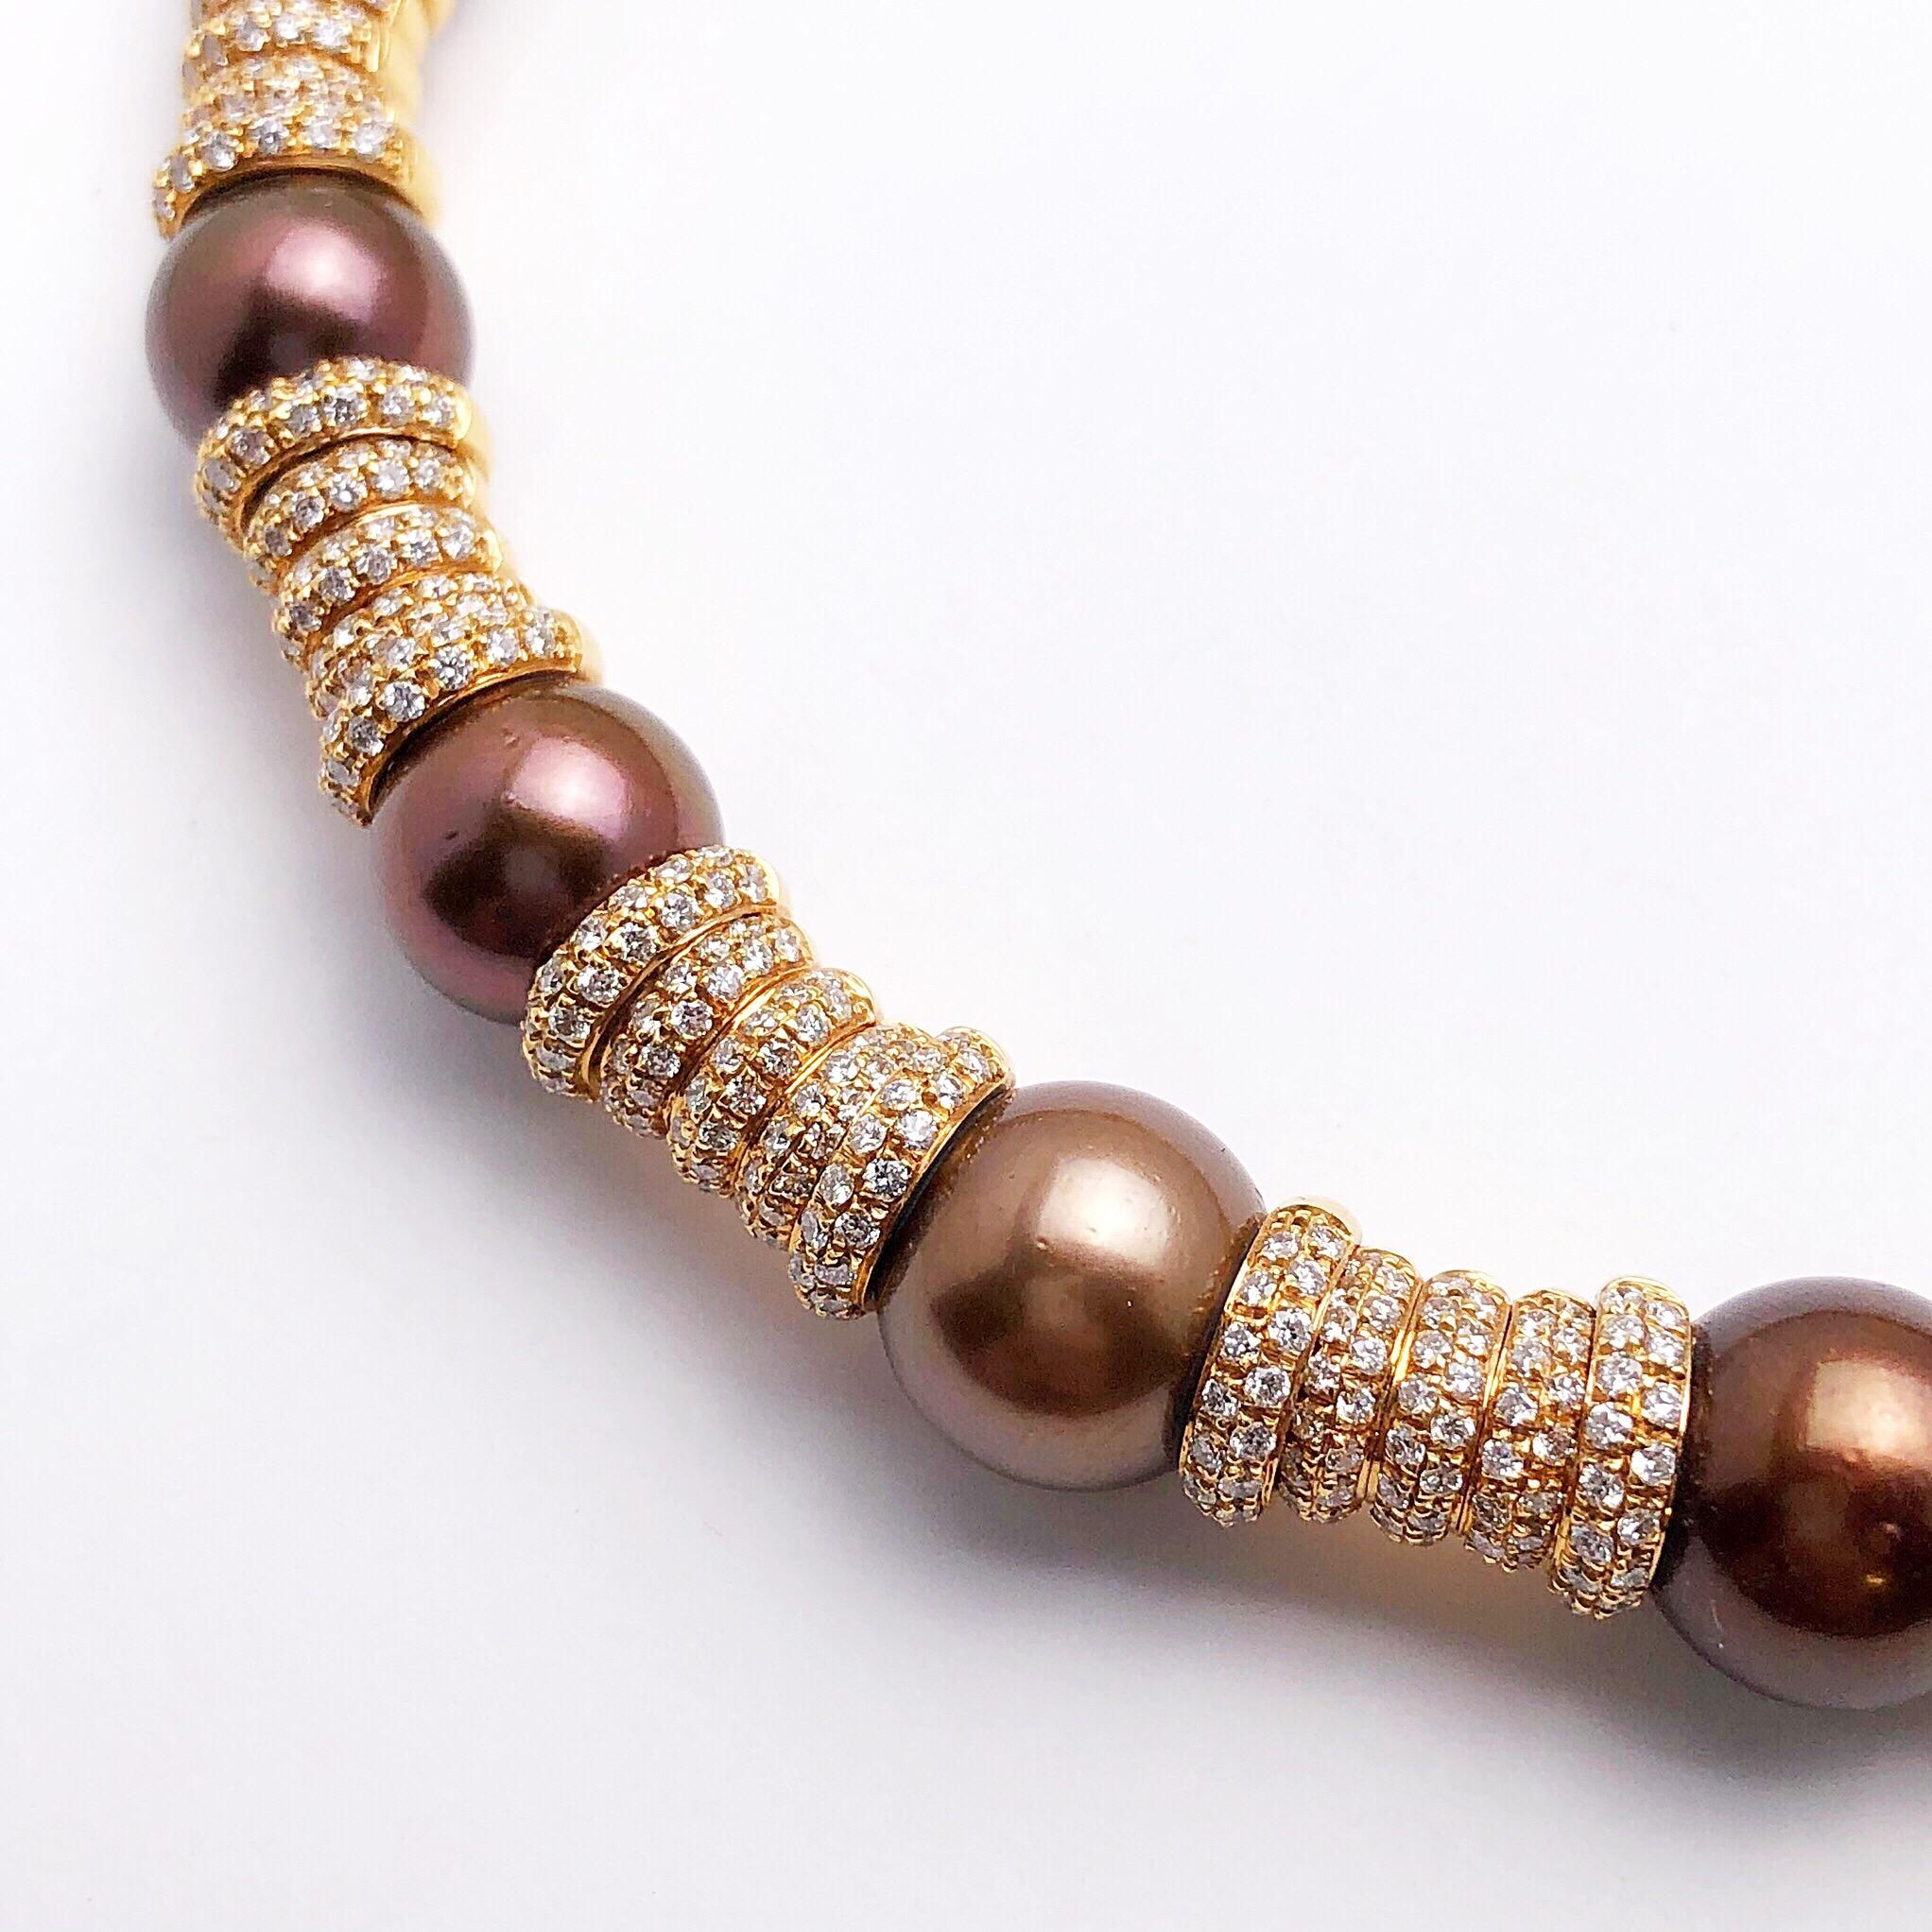 Made in Italy by the famed jeweler G.Verdi, Cellini presents this exquisite collar necklace.  The choker features 19 brown south sea pearls ranging in sizes from 13mm to 10mm. The  pearls are separated by pave diamond rondelle sections,  total